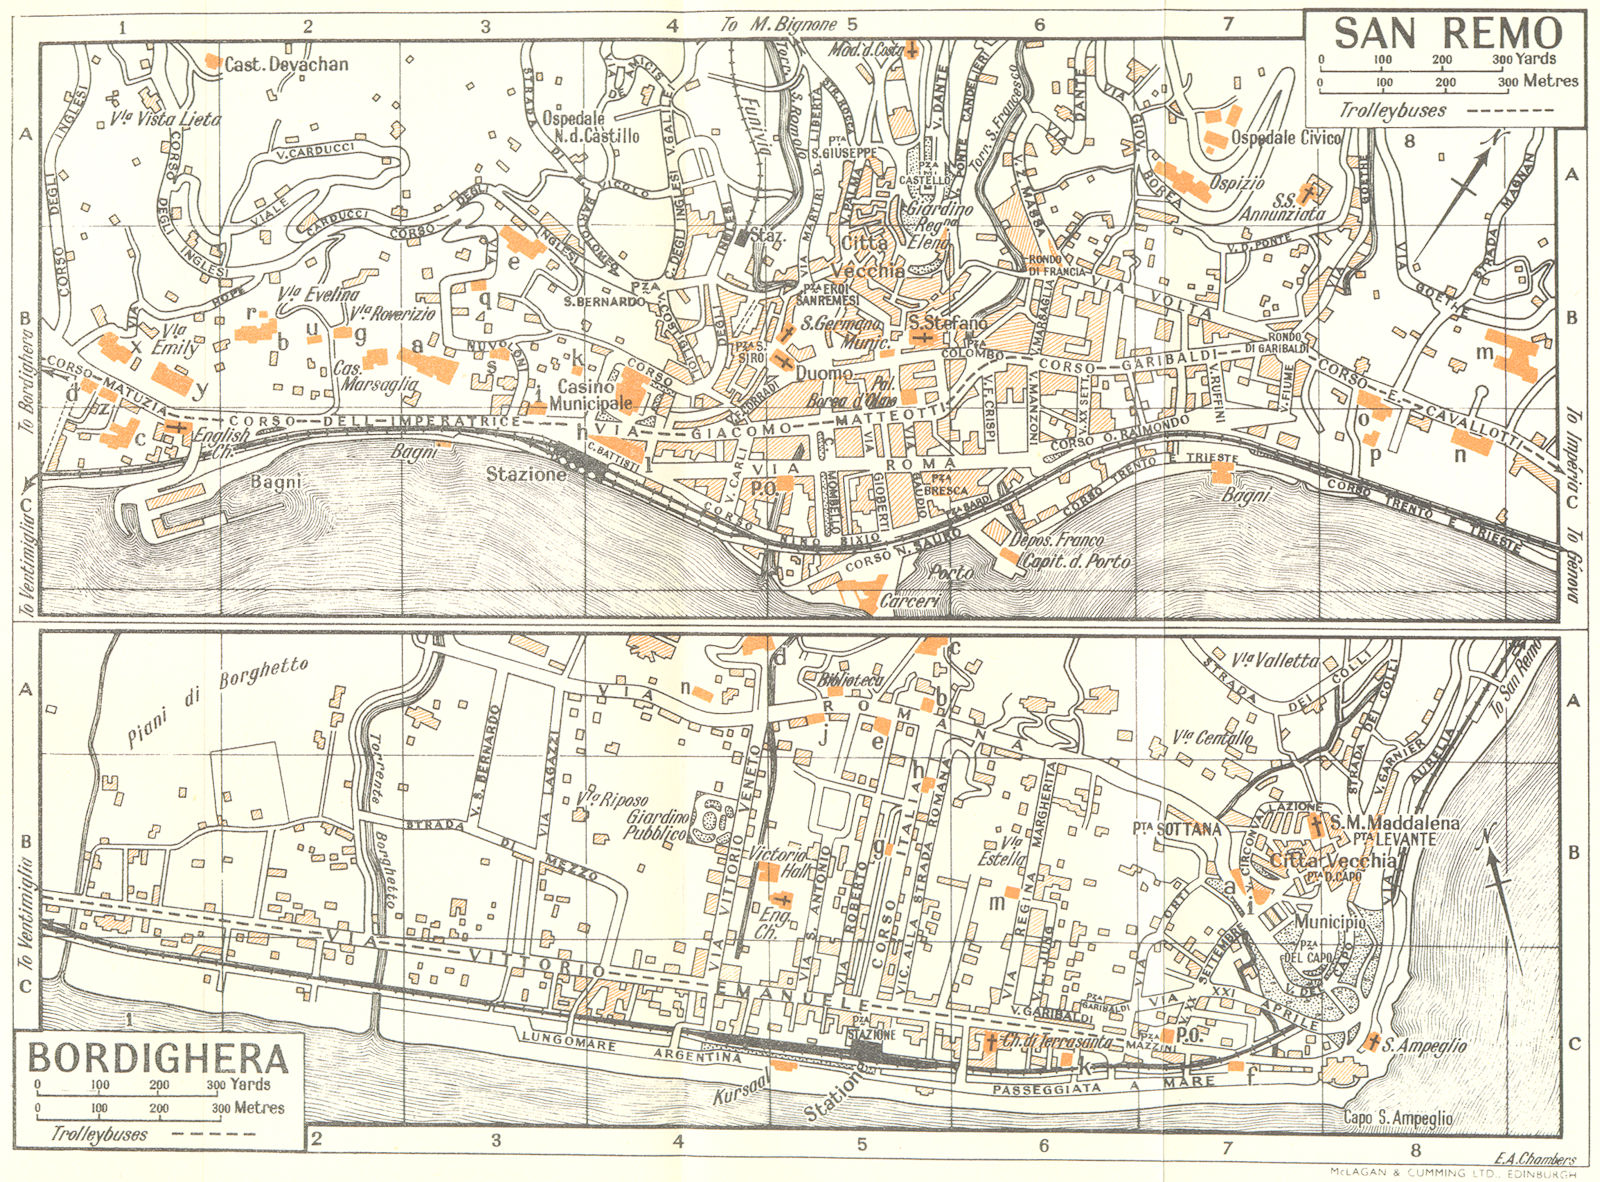 Associate Product SAN REMO; BORDIGHERA town/city plan. Italy 1953 old vintage map chart